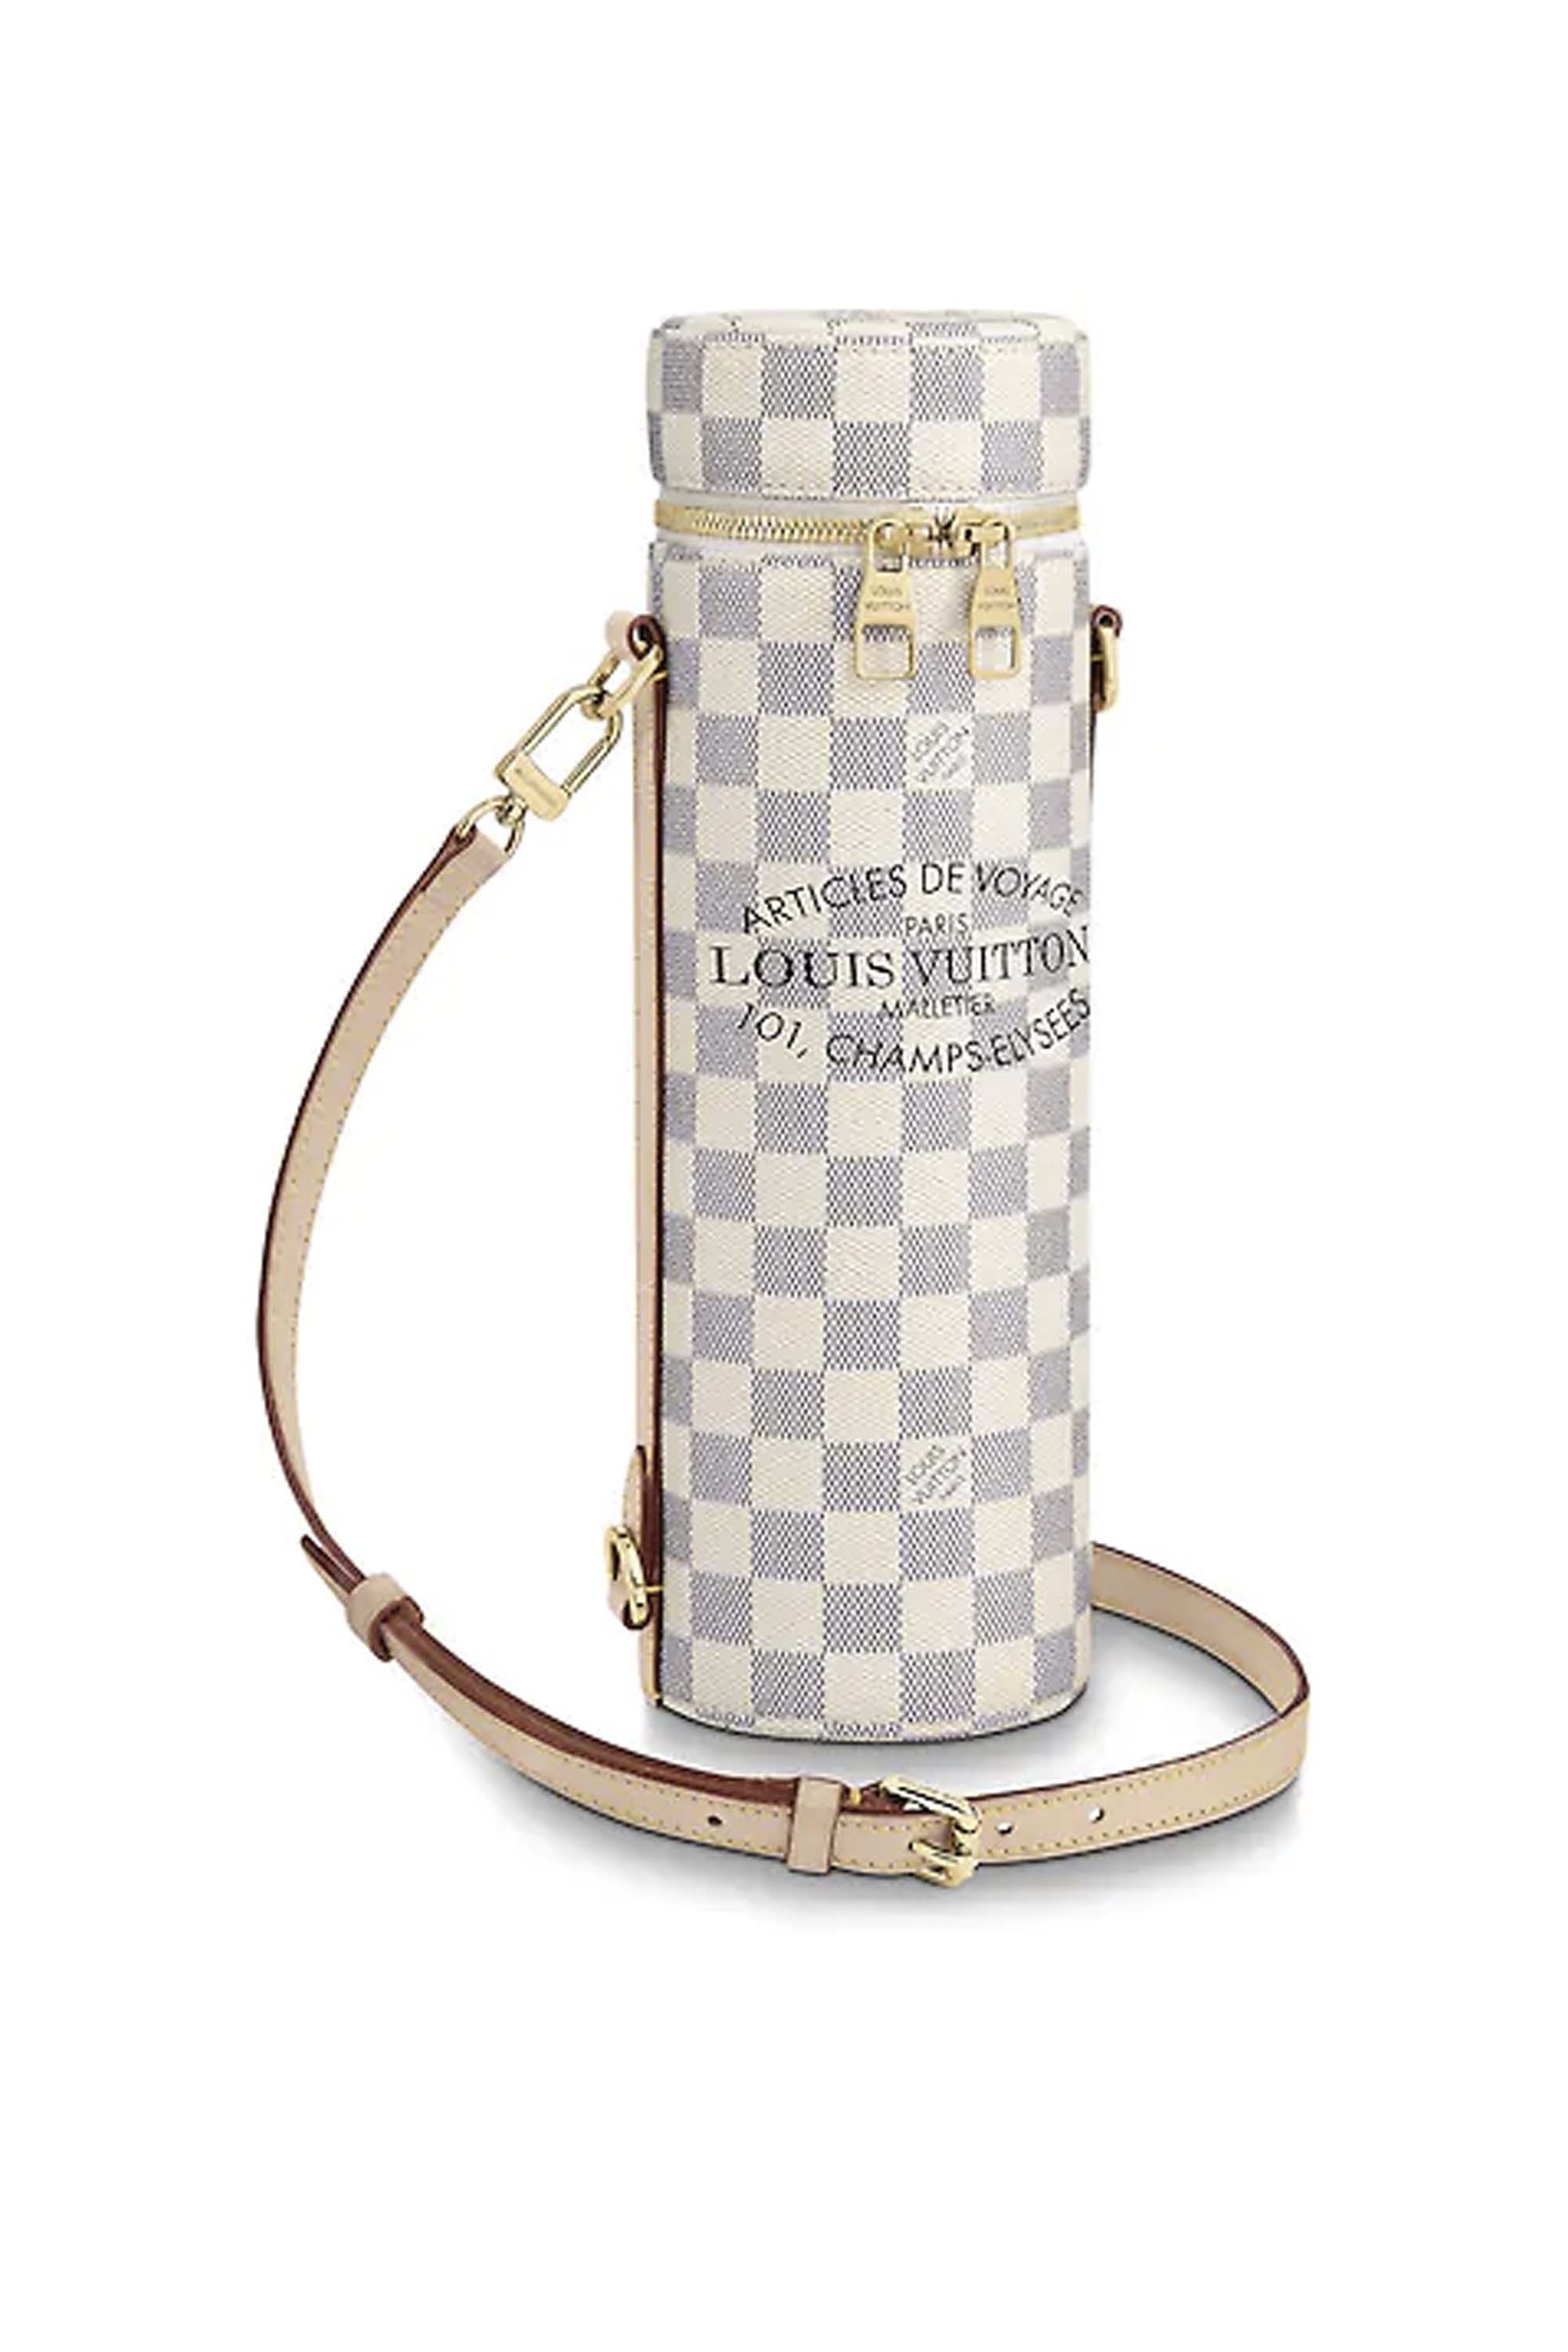 Louis Vuitton Releases New Exercise Gear for Your Home Workouts